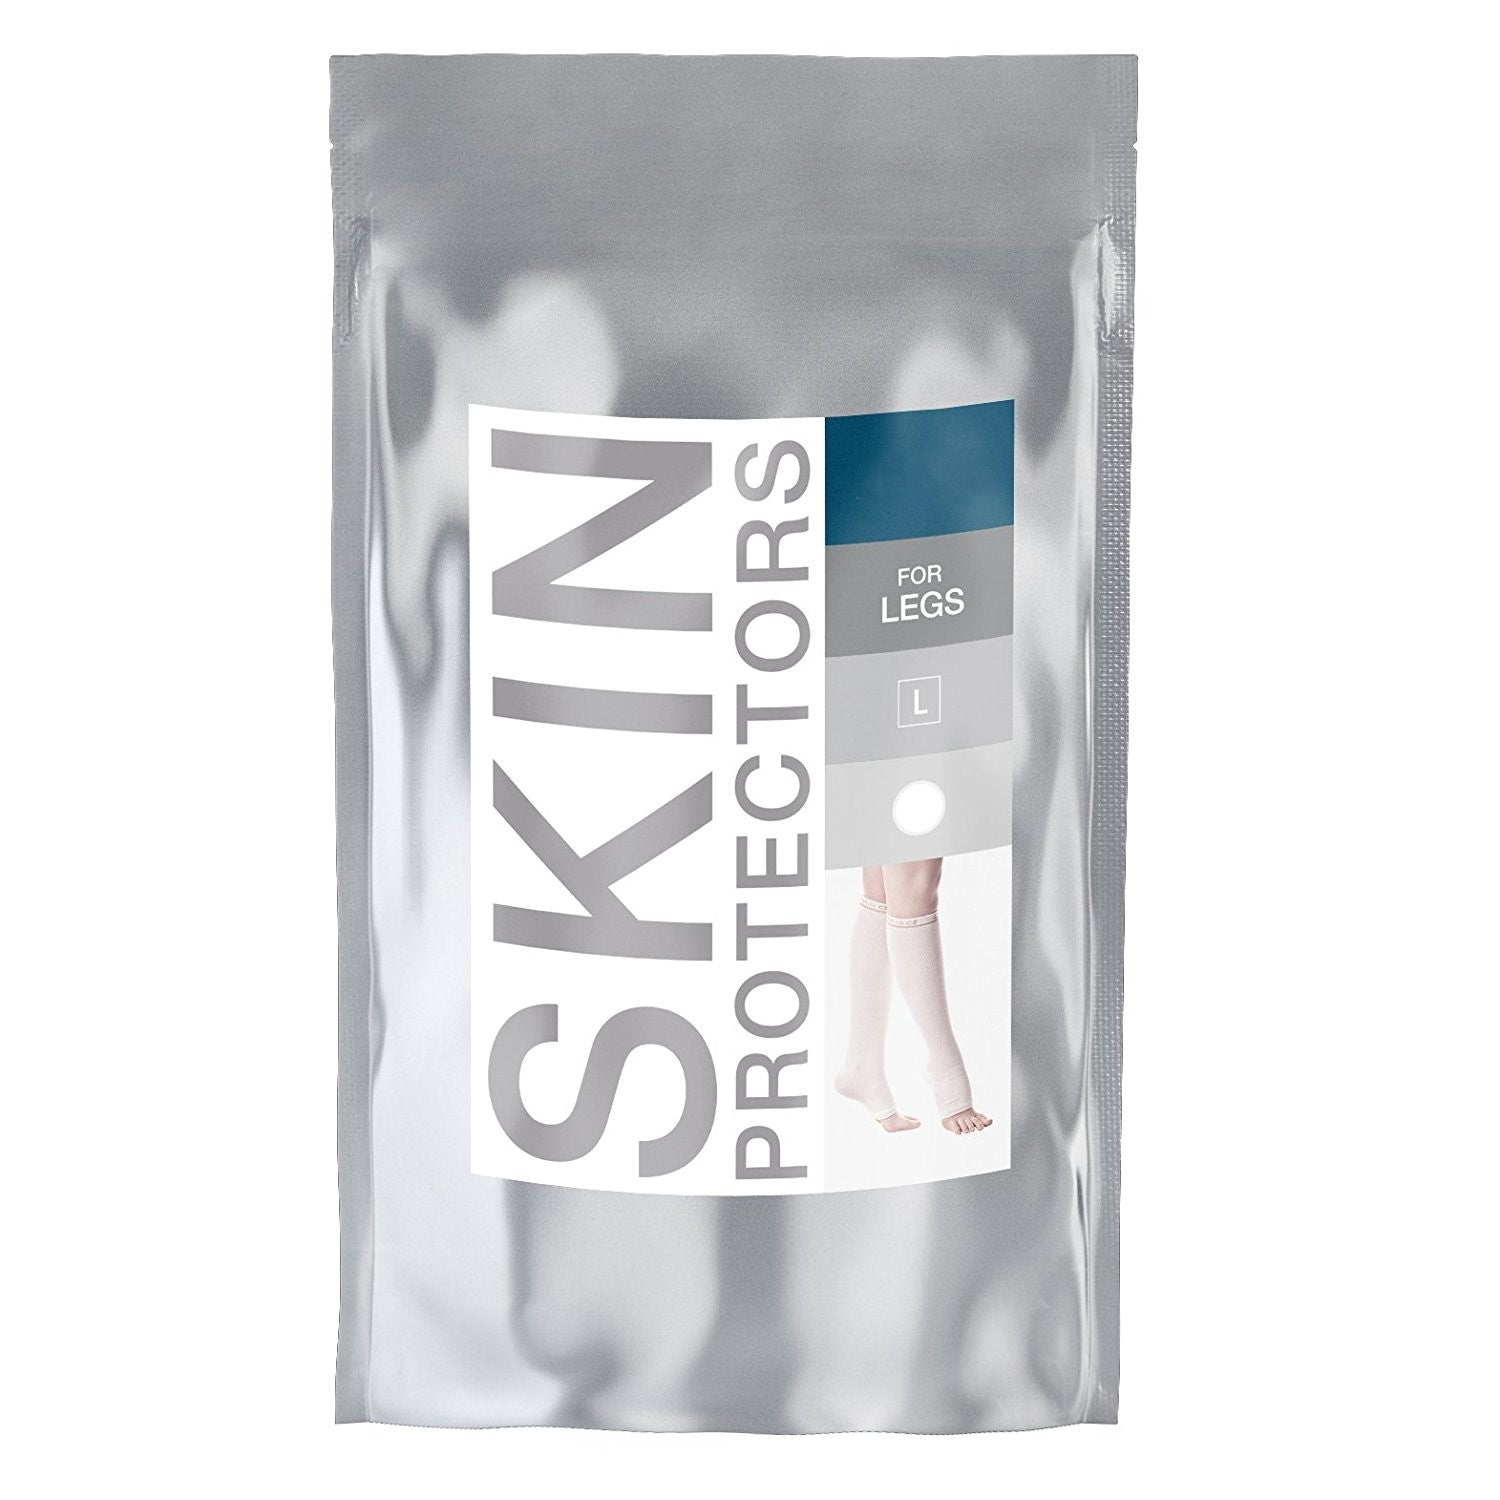 Skin Protectors For Legs - White, Pair (2pc)